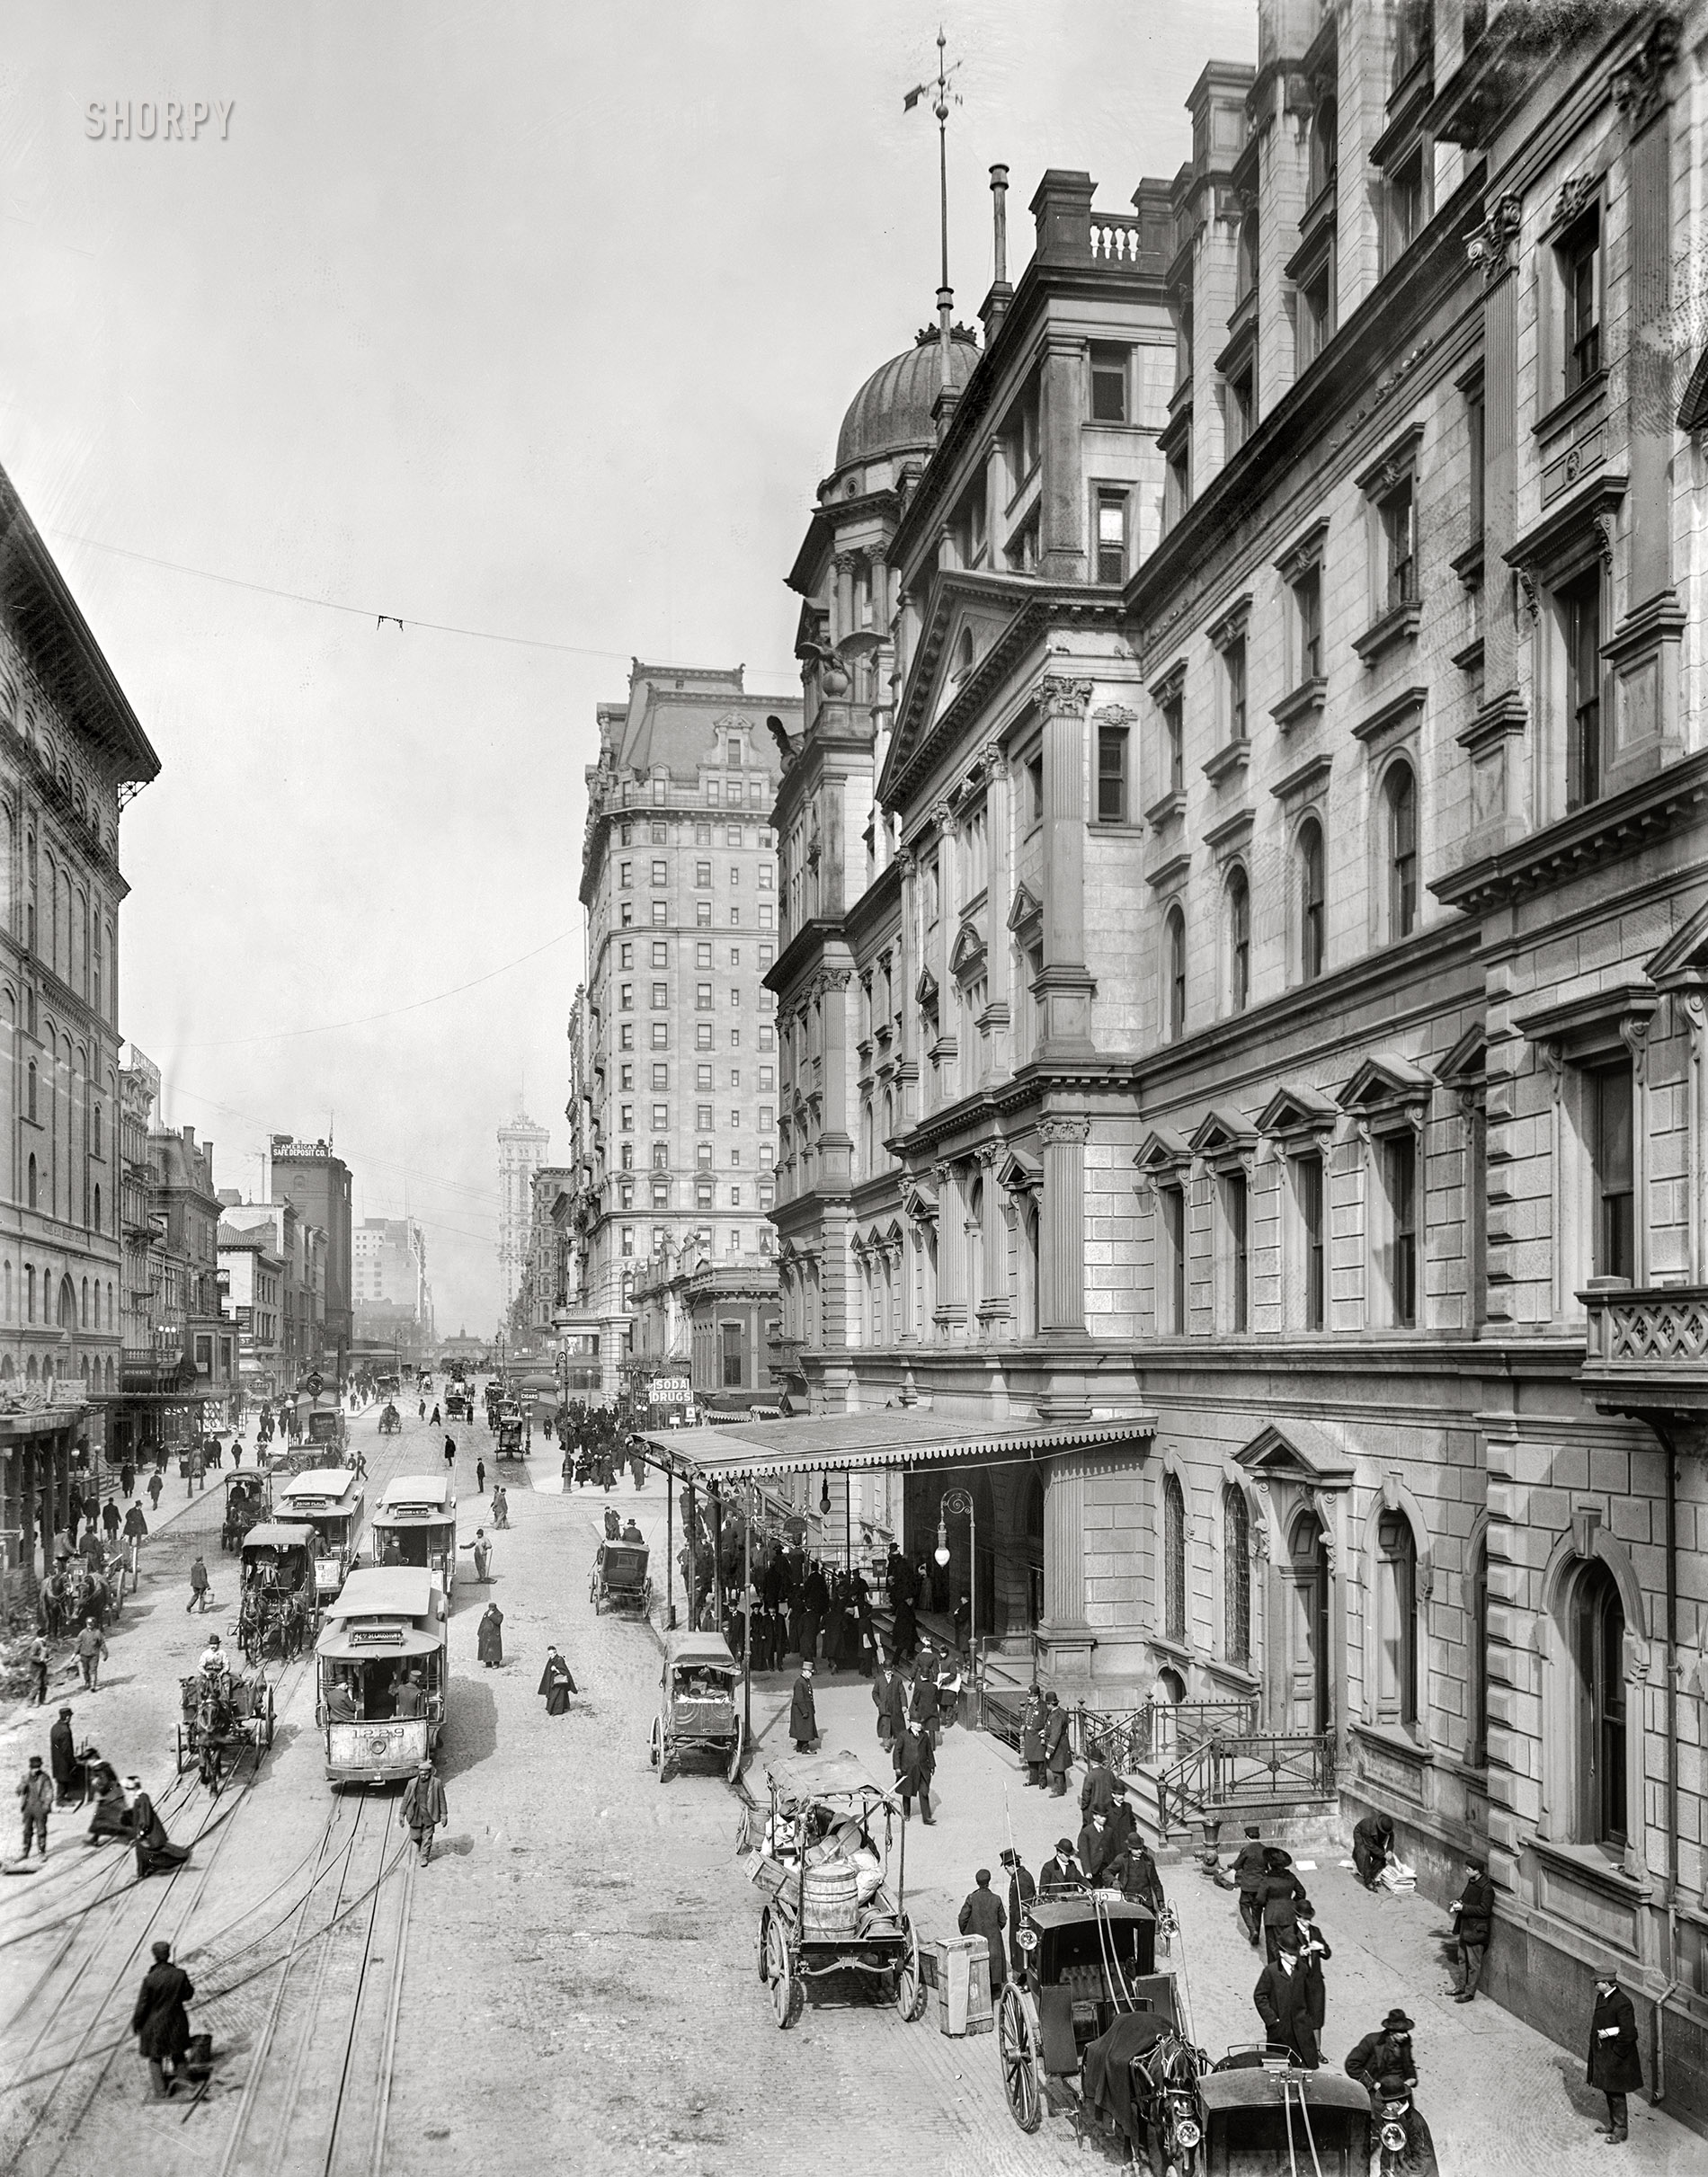 Circa 1905. "New York City, Snap Shatow, 42nd Street, showing entrance to Grand Central Station." 8x10 inch dry plate glass negative, Detroit Photographic Company. View full size.